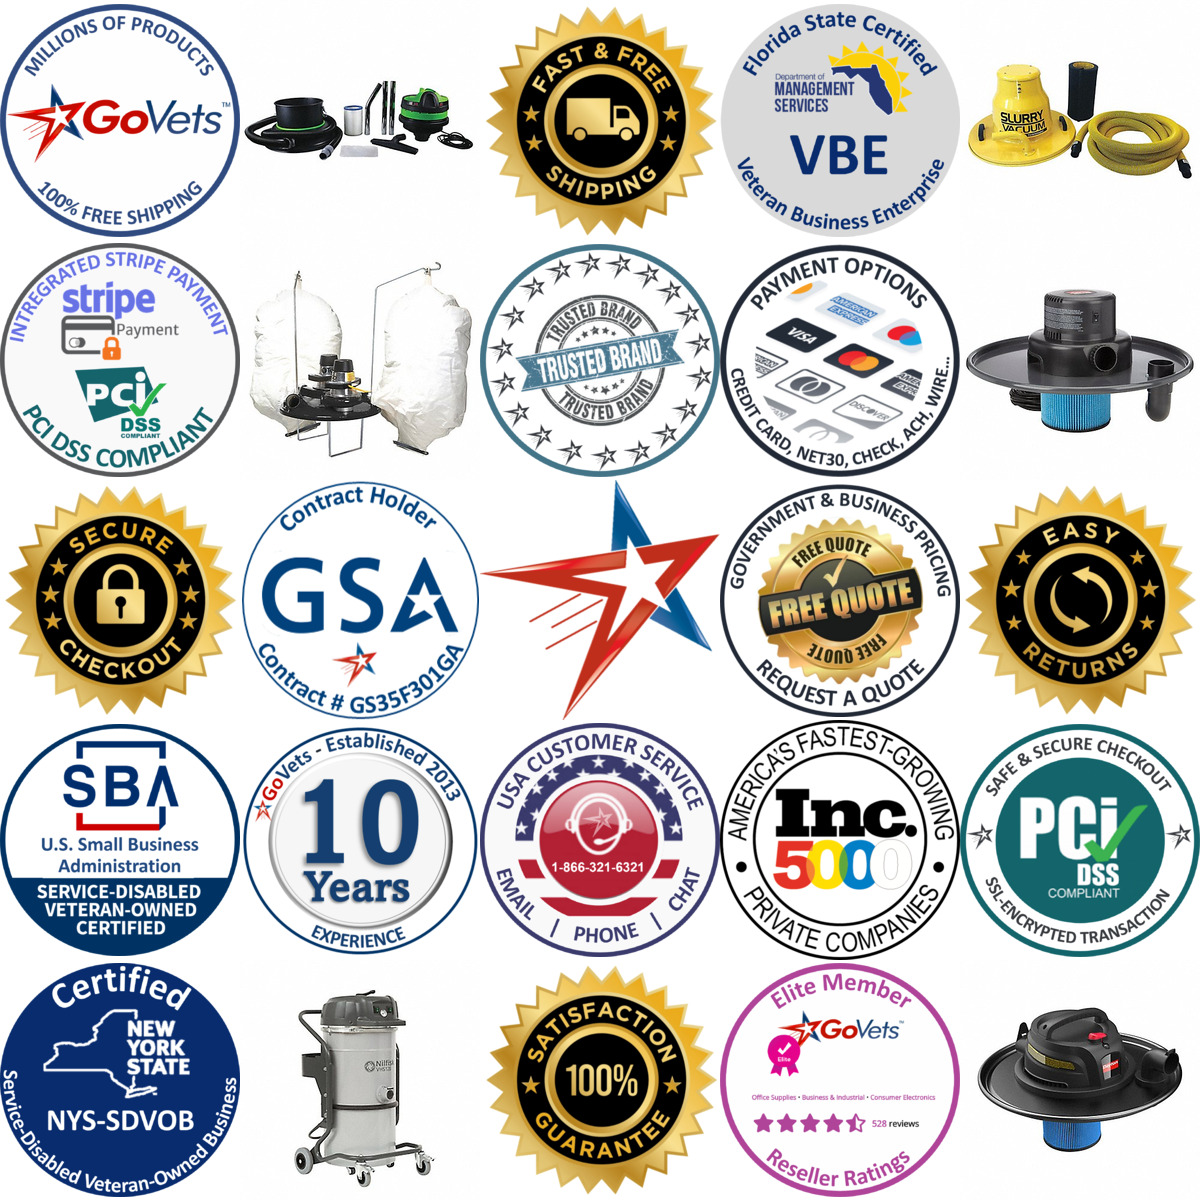 A selection of Vacuum Heads products on GoVets